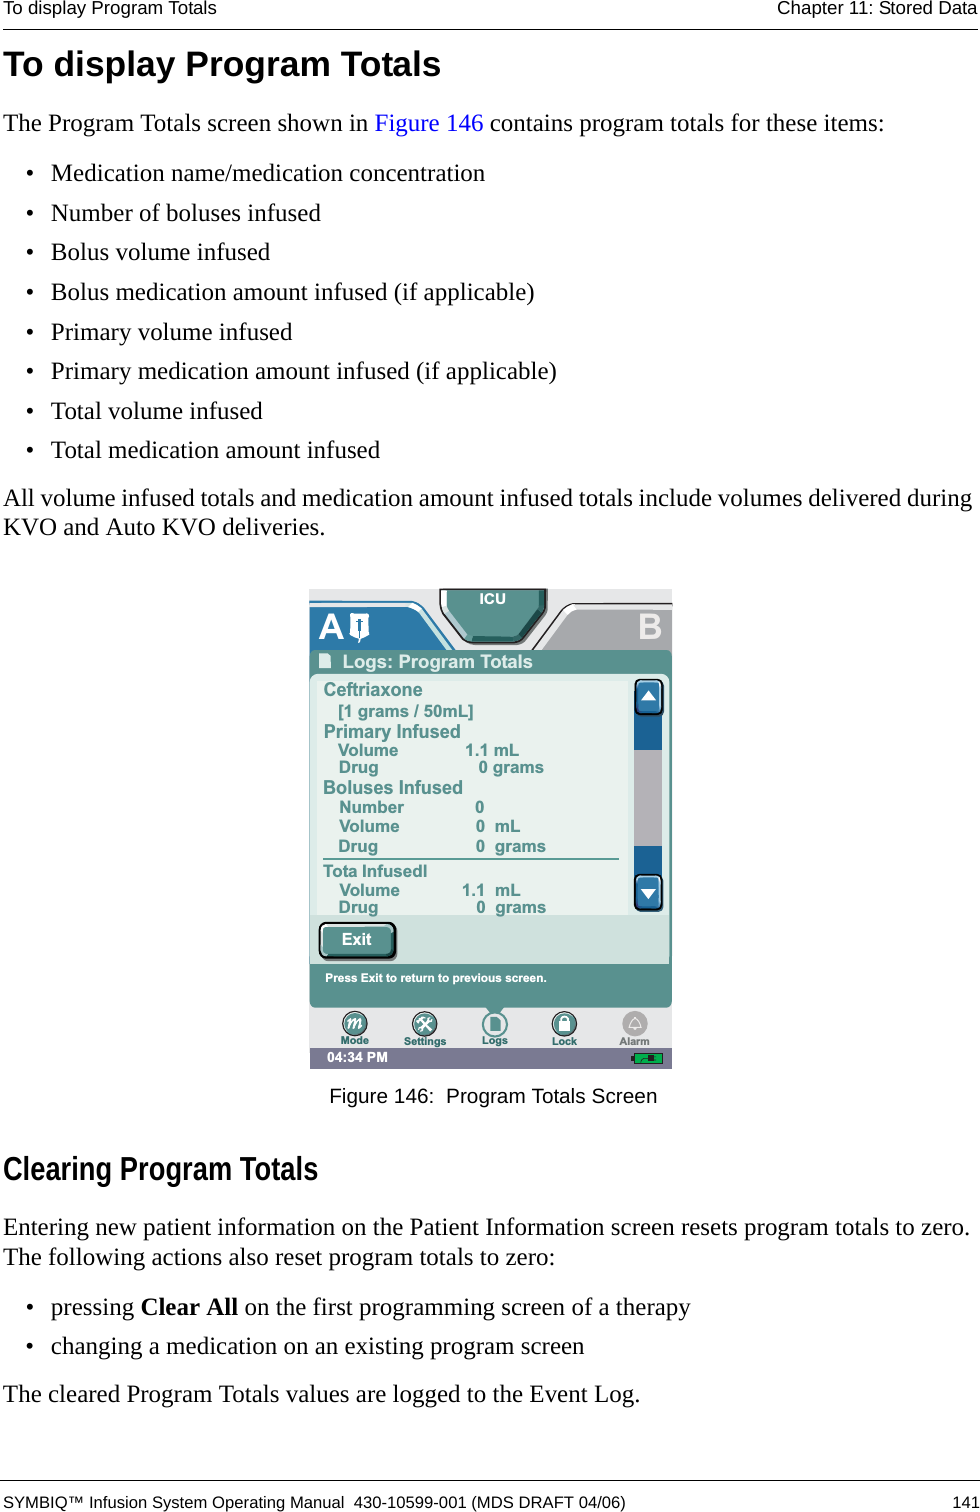 To display Program Totals Chapter 11: Stored Data SYMBIQ™ Infusion System Operating Manual  430-10599-001 (MDS DRAFT 04/06) 141To display Program TotalsThe Program Totals screen shown in Figure 146 contains program totals for these items:• Medication name/medication concentration• Number of boluses infused• Bolus volume infused• Bolus medication amount infused (if applicable)• Primary volume infused• Primary medication amount infused (if applicable)• Total volume infused• Total medication amount infusedAll volume infused totals and medication amount infused totals include volumes delivered during KVO and Auto KVO deliveries. Figure 146:  Program Totals ScreenClearing Program TotalsEntering new patient information on the Patient Information screen resets program totals to zero. The following actions also reset program totals to zero:• pressing Clear All on the first programming screen of a therapy• changing a medication on an existing program screenThe cleared Program Totals values are logged to the Event Log.04:34 PMBPress arrows to scroll to other entries. Press Exit to returnto prior screen.ALogs: Program Totals[1 grams / 50mL]Volume 1.1 mLTota InfusedlDrug 0 gramsNumber 0Volume 0 mLVolume 1.1 mLDrug 0 gramsDrug 0 gramsCeftriaxonePrimary InfusedBoluses InfusedICUSettings Logs LockModeExitAlarmPress Exit to return to previous screen.